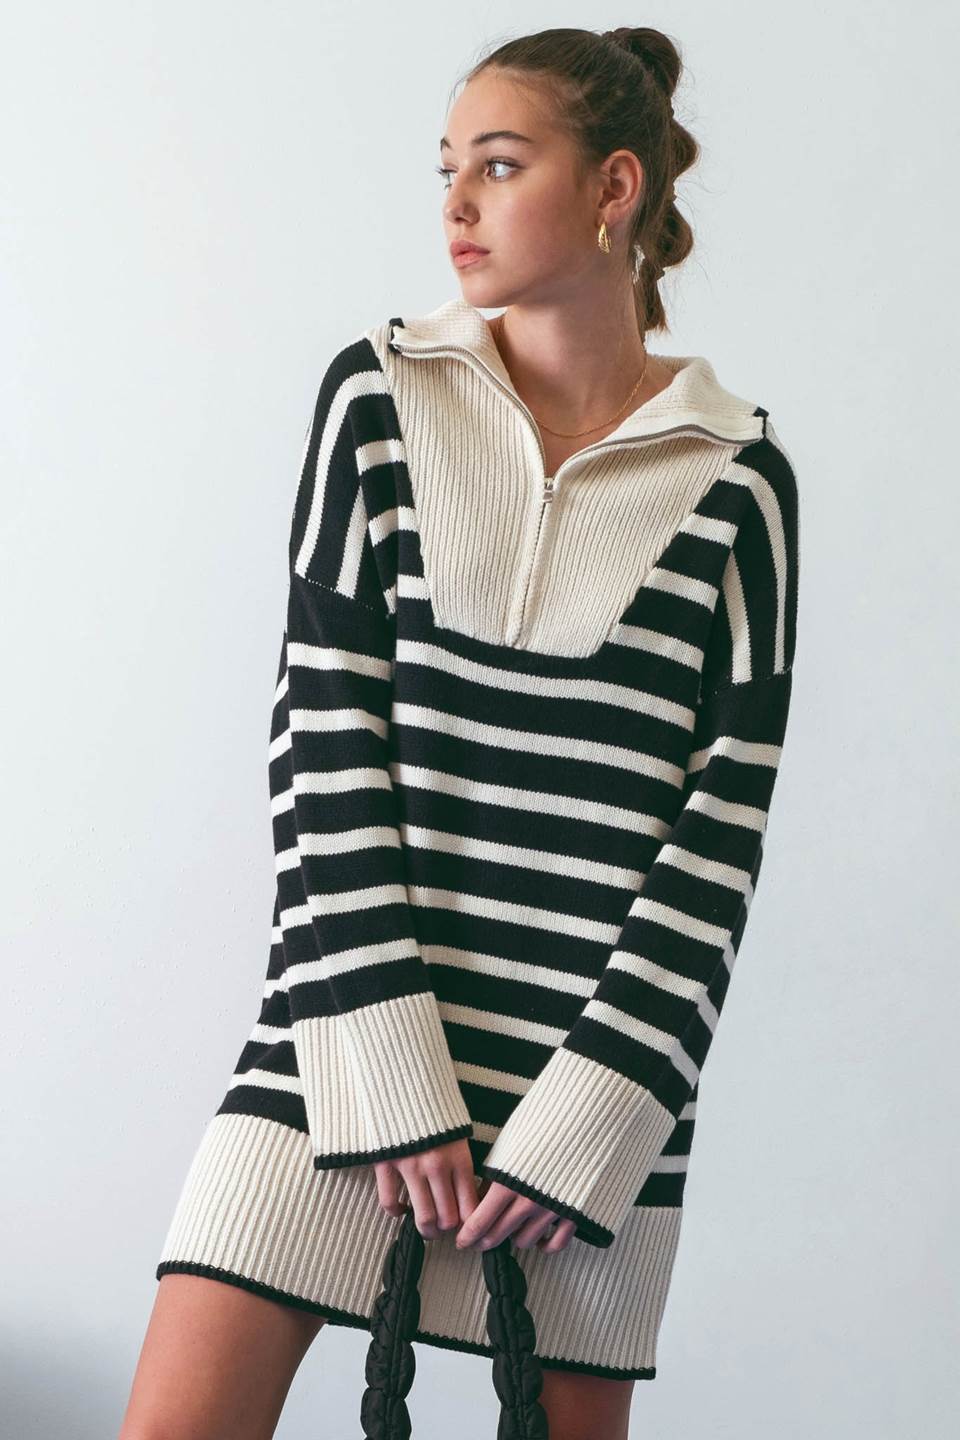 STRIPED COLLARED KNIT SWEATER DRESS